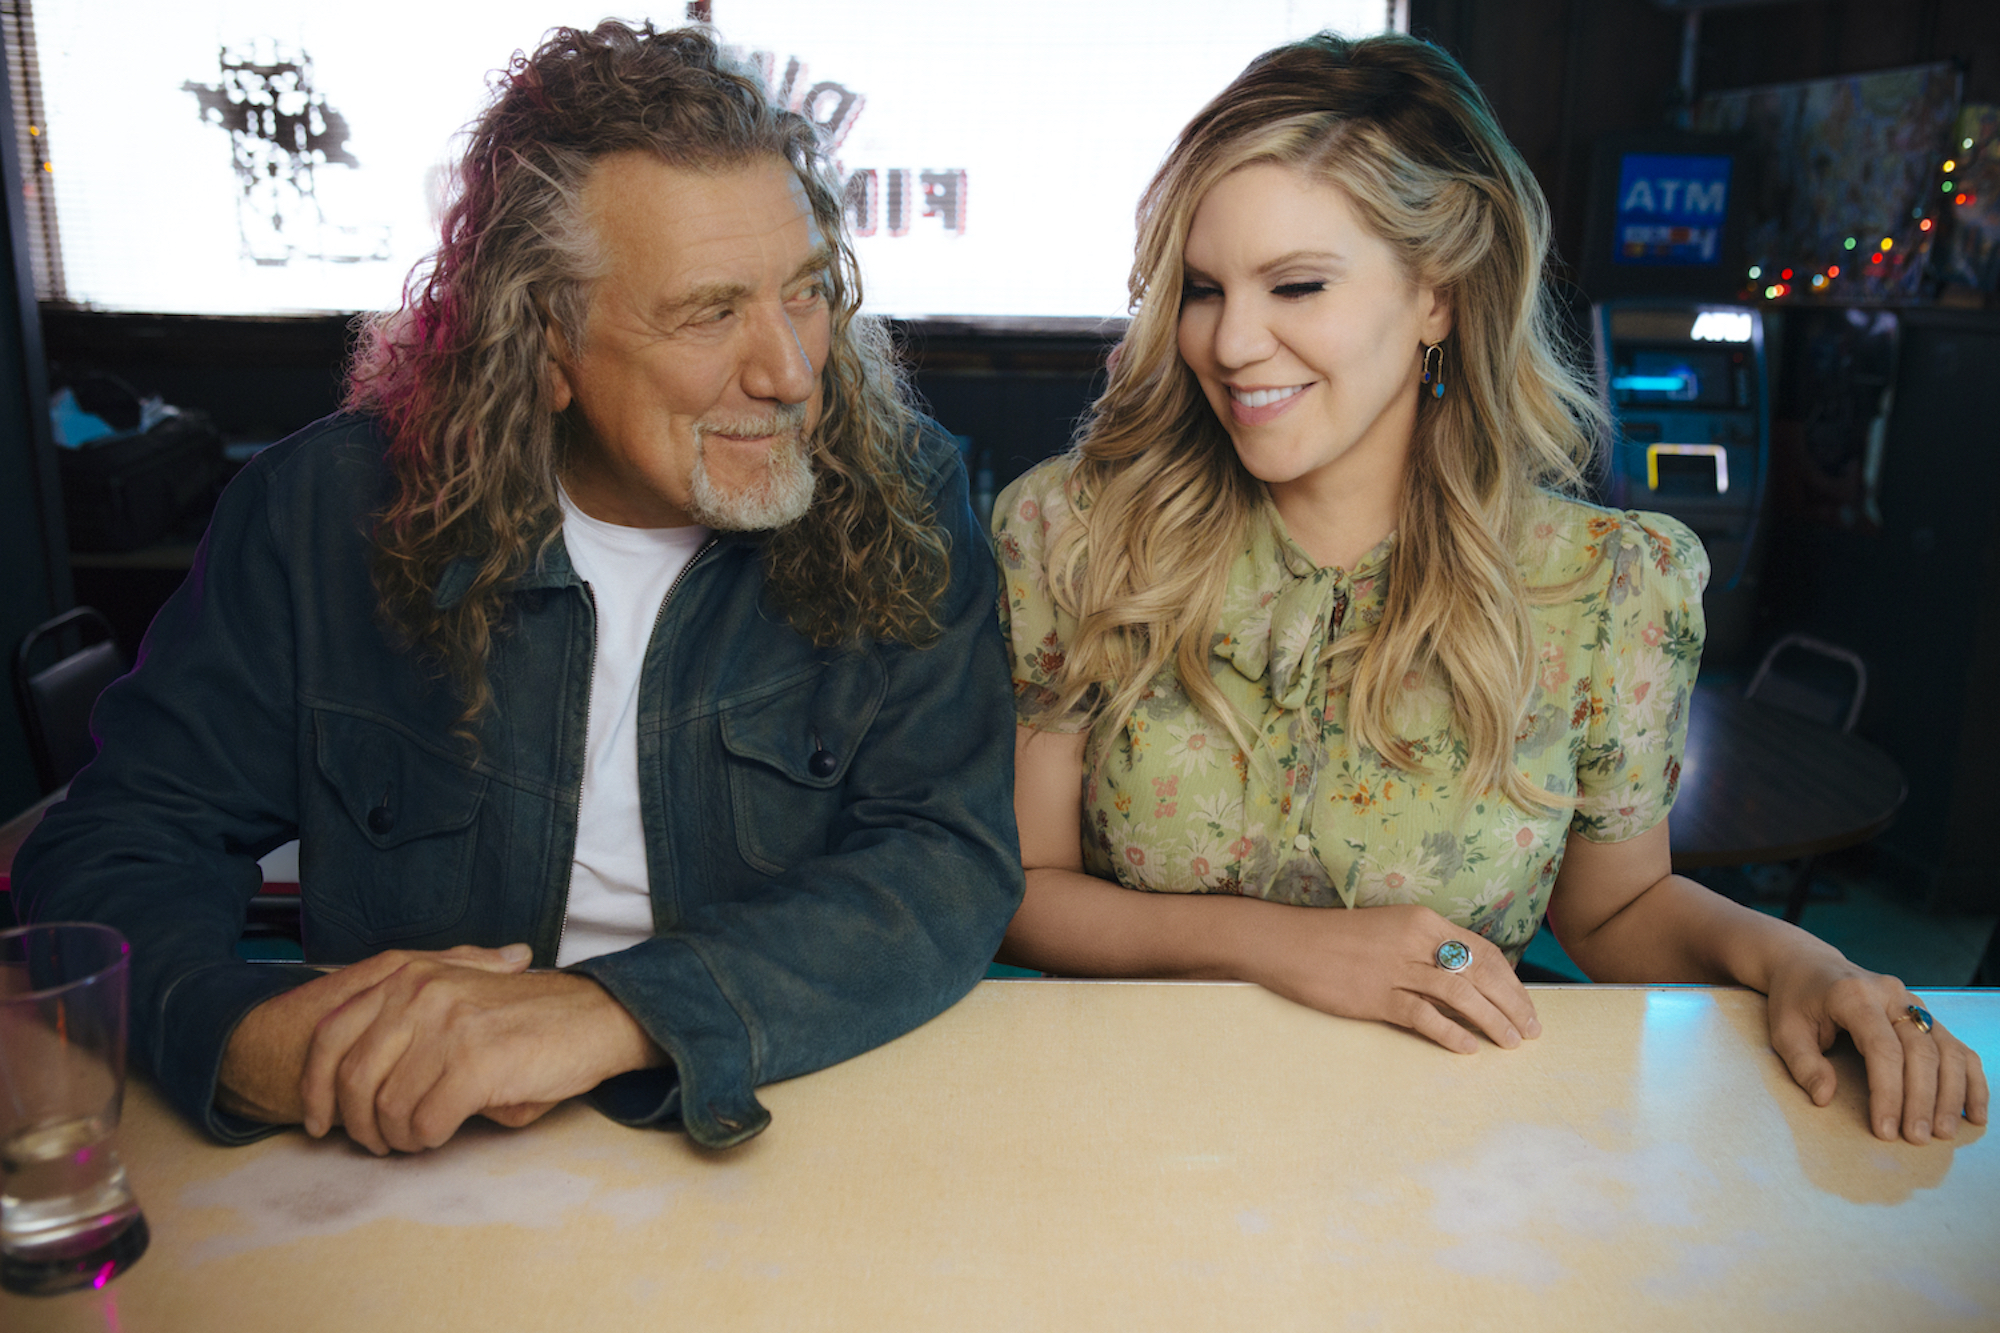 Robert Plant and Alison Krauss Bring <i>Raise the Roof</i> Songs to <i>Colbert</i> and <i>CBS Saturday Morning</i>